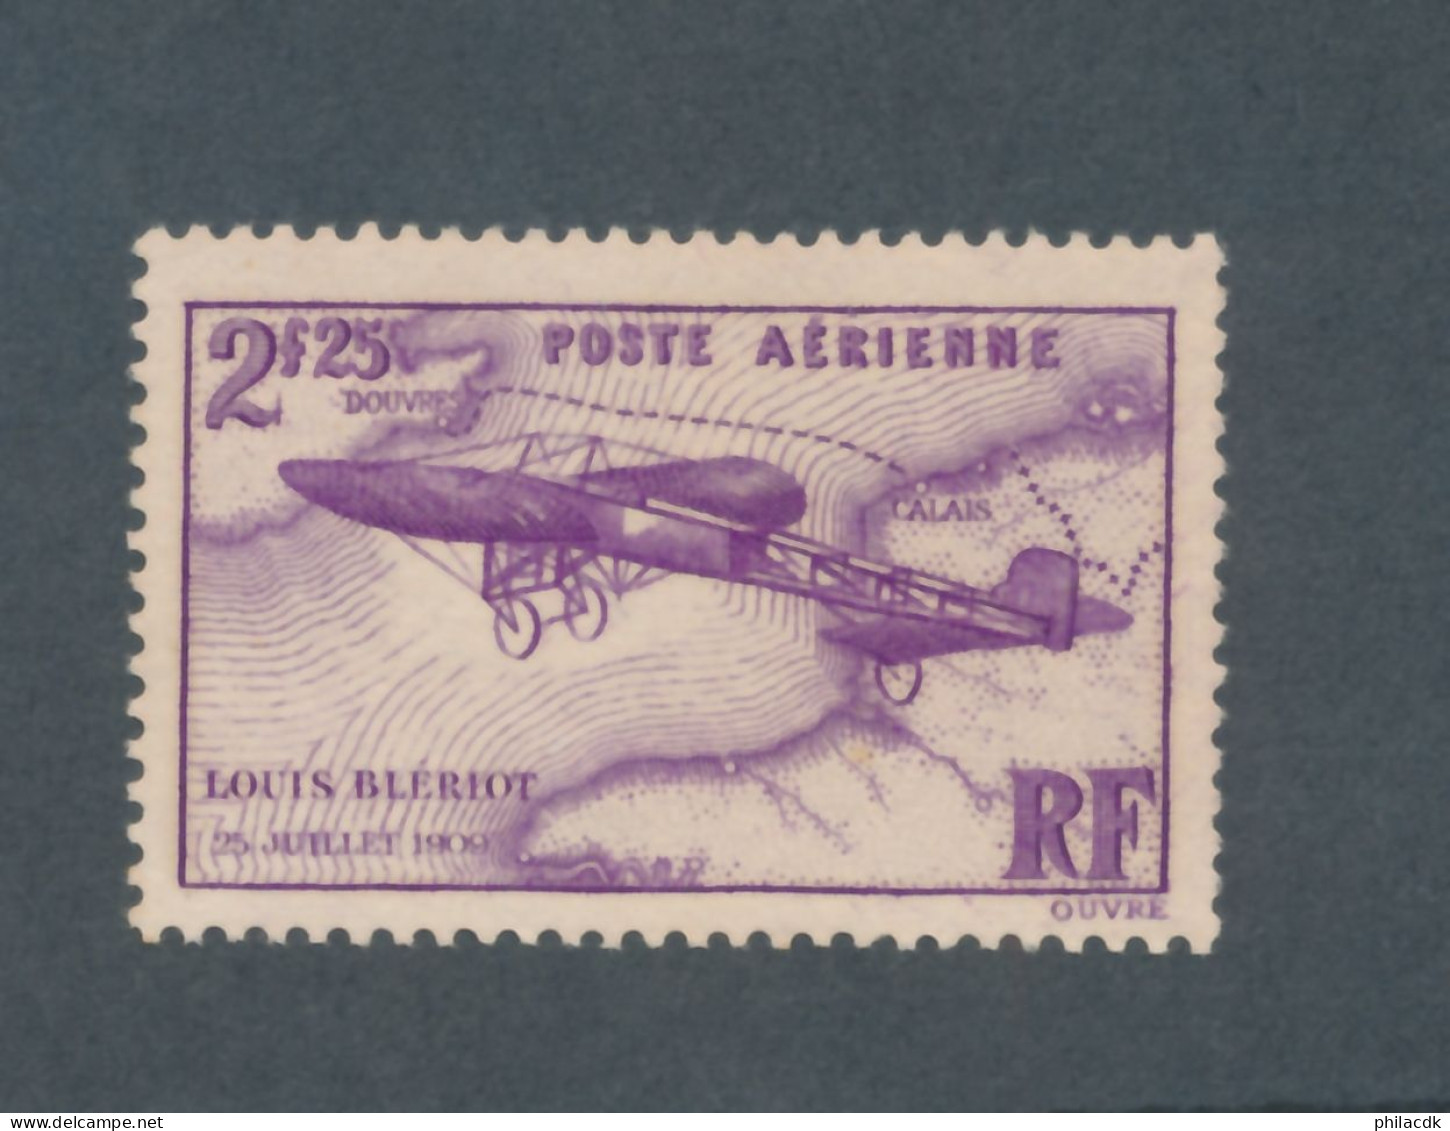 FRANCE - POSTE AERIENNE N° 7 NEUF* AVEC CHARNIERE - COTE : 26€ - 1934 - 1927-1959 Mint/hinged